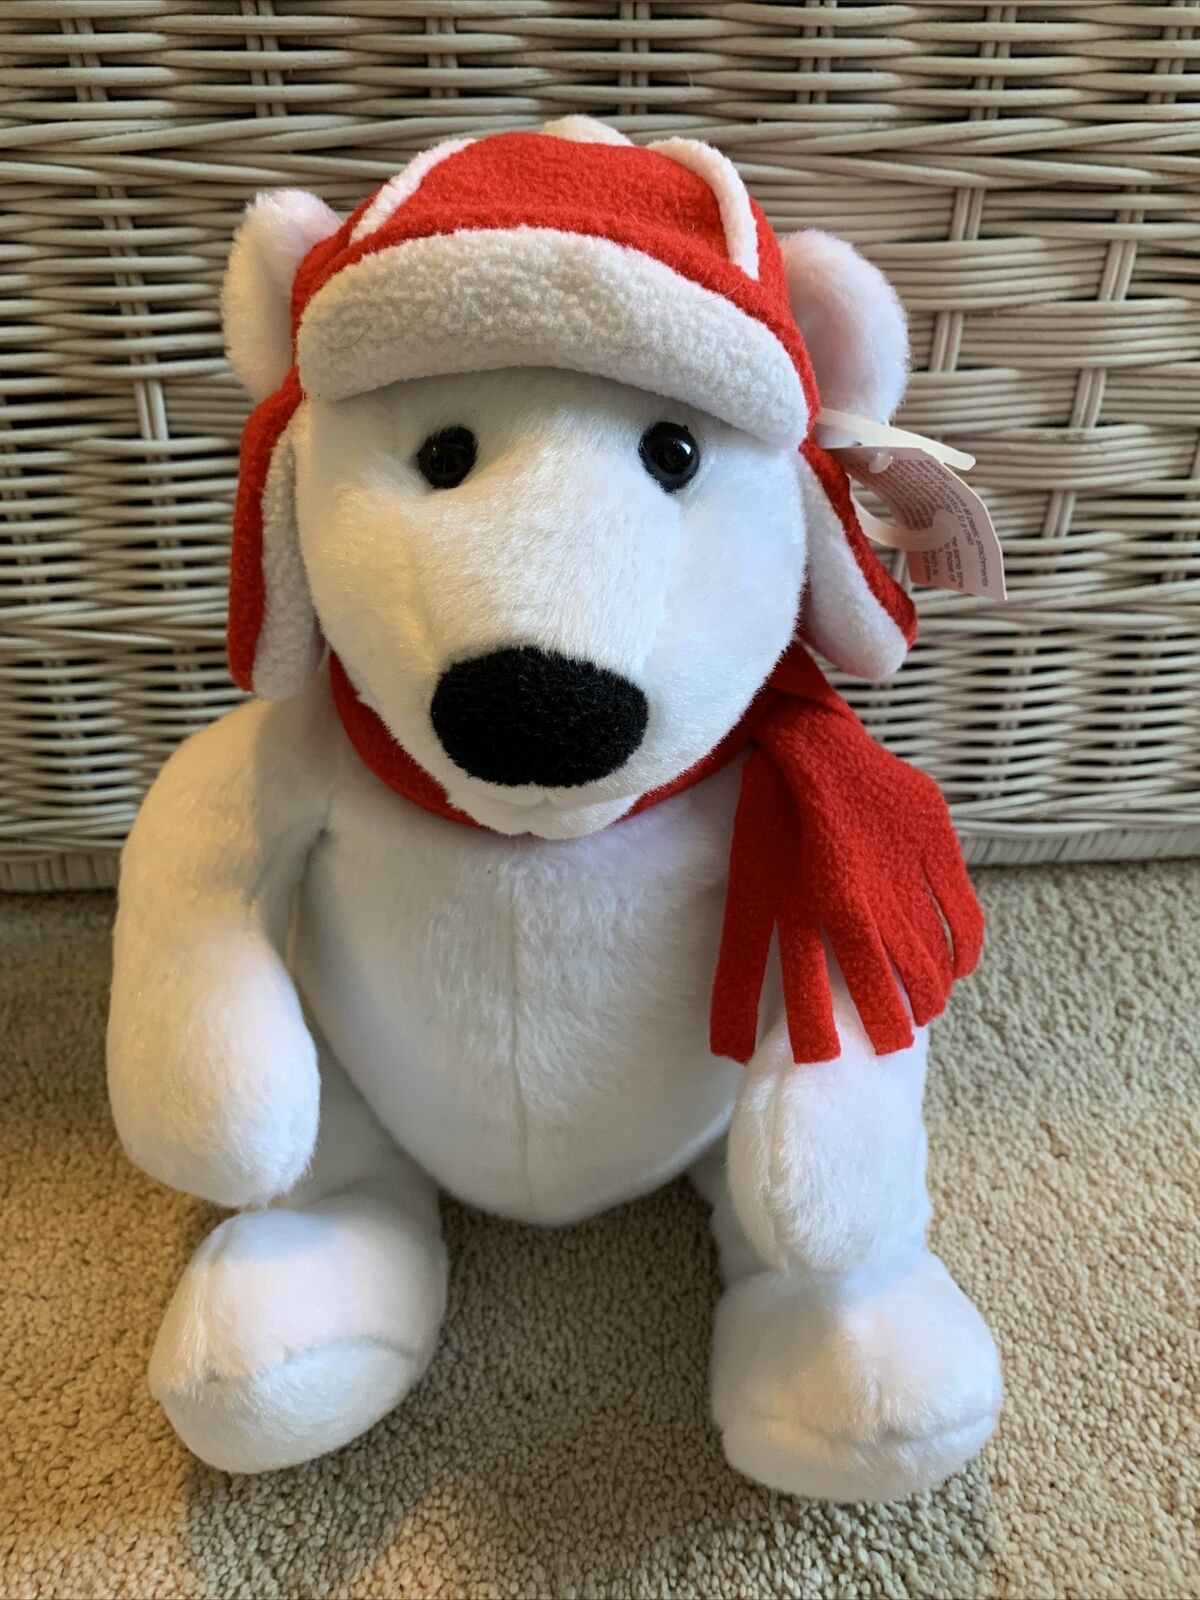 American Greetings  White Polar Bear  Stuffed Plush  New With Tags  Doesn't Work